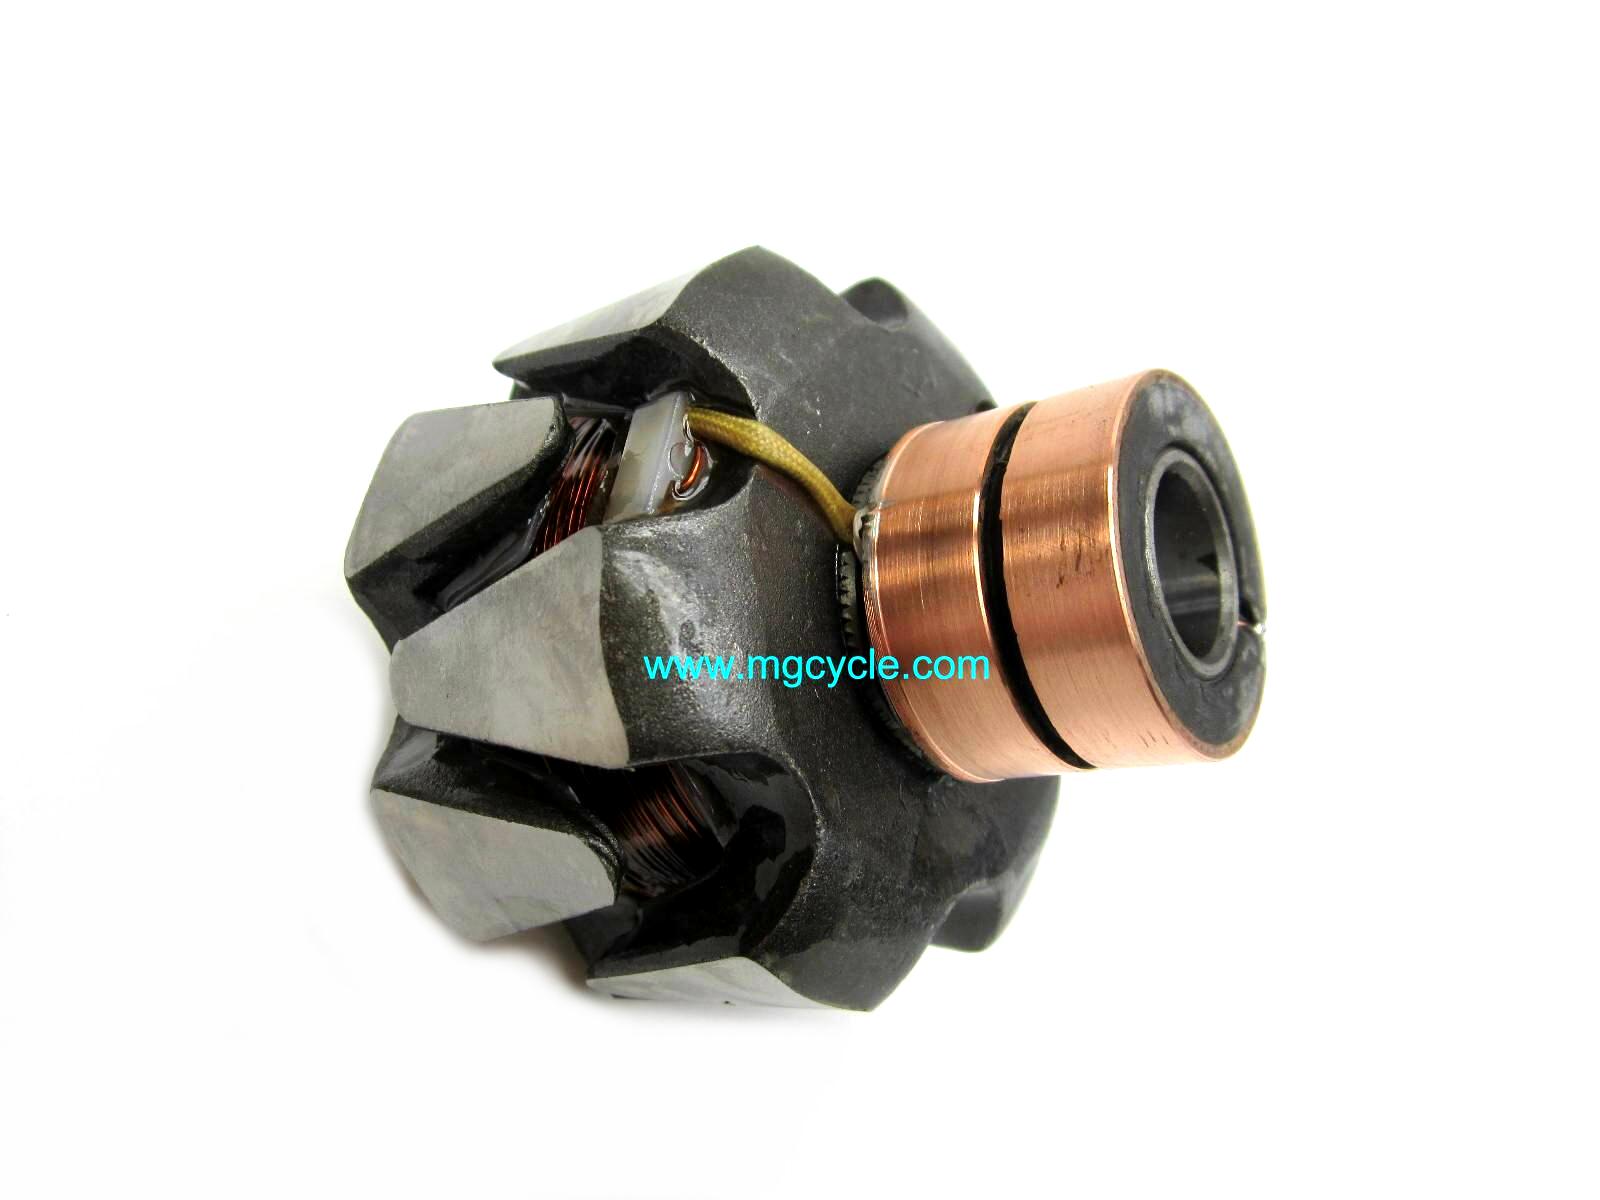 Alternator rotor, ~3.4 ohms for Bosch charging systems Guzzi BMW - Click Image to Close